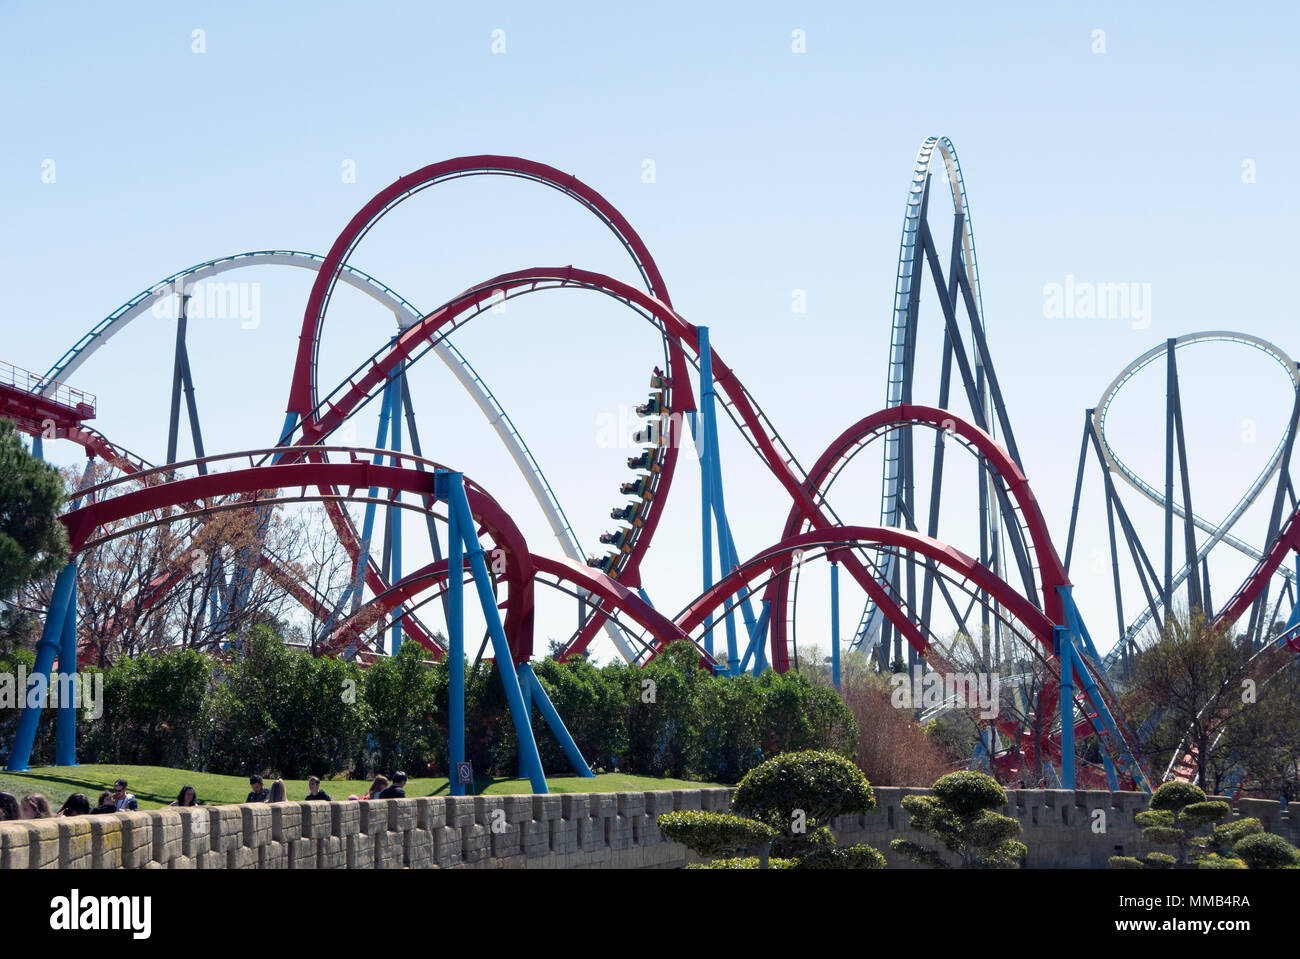 Port Aventura High Resolution Stock Photography and Images - Alamy